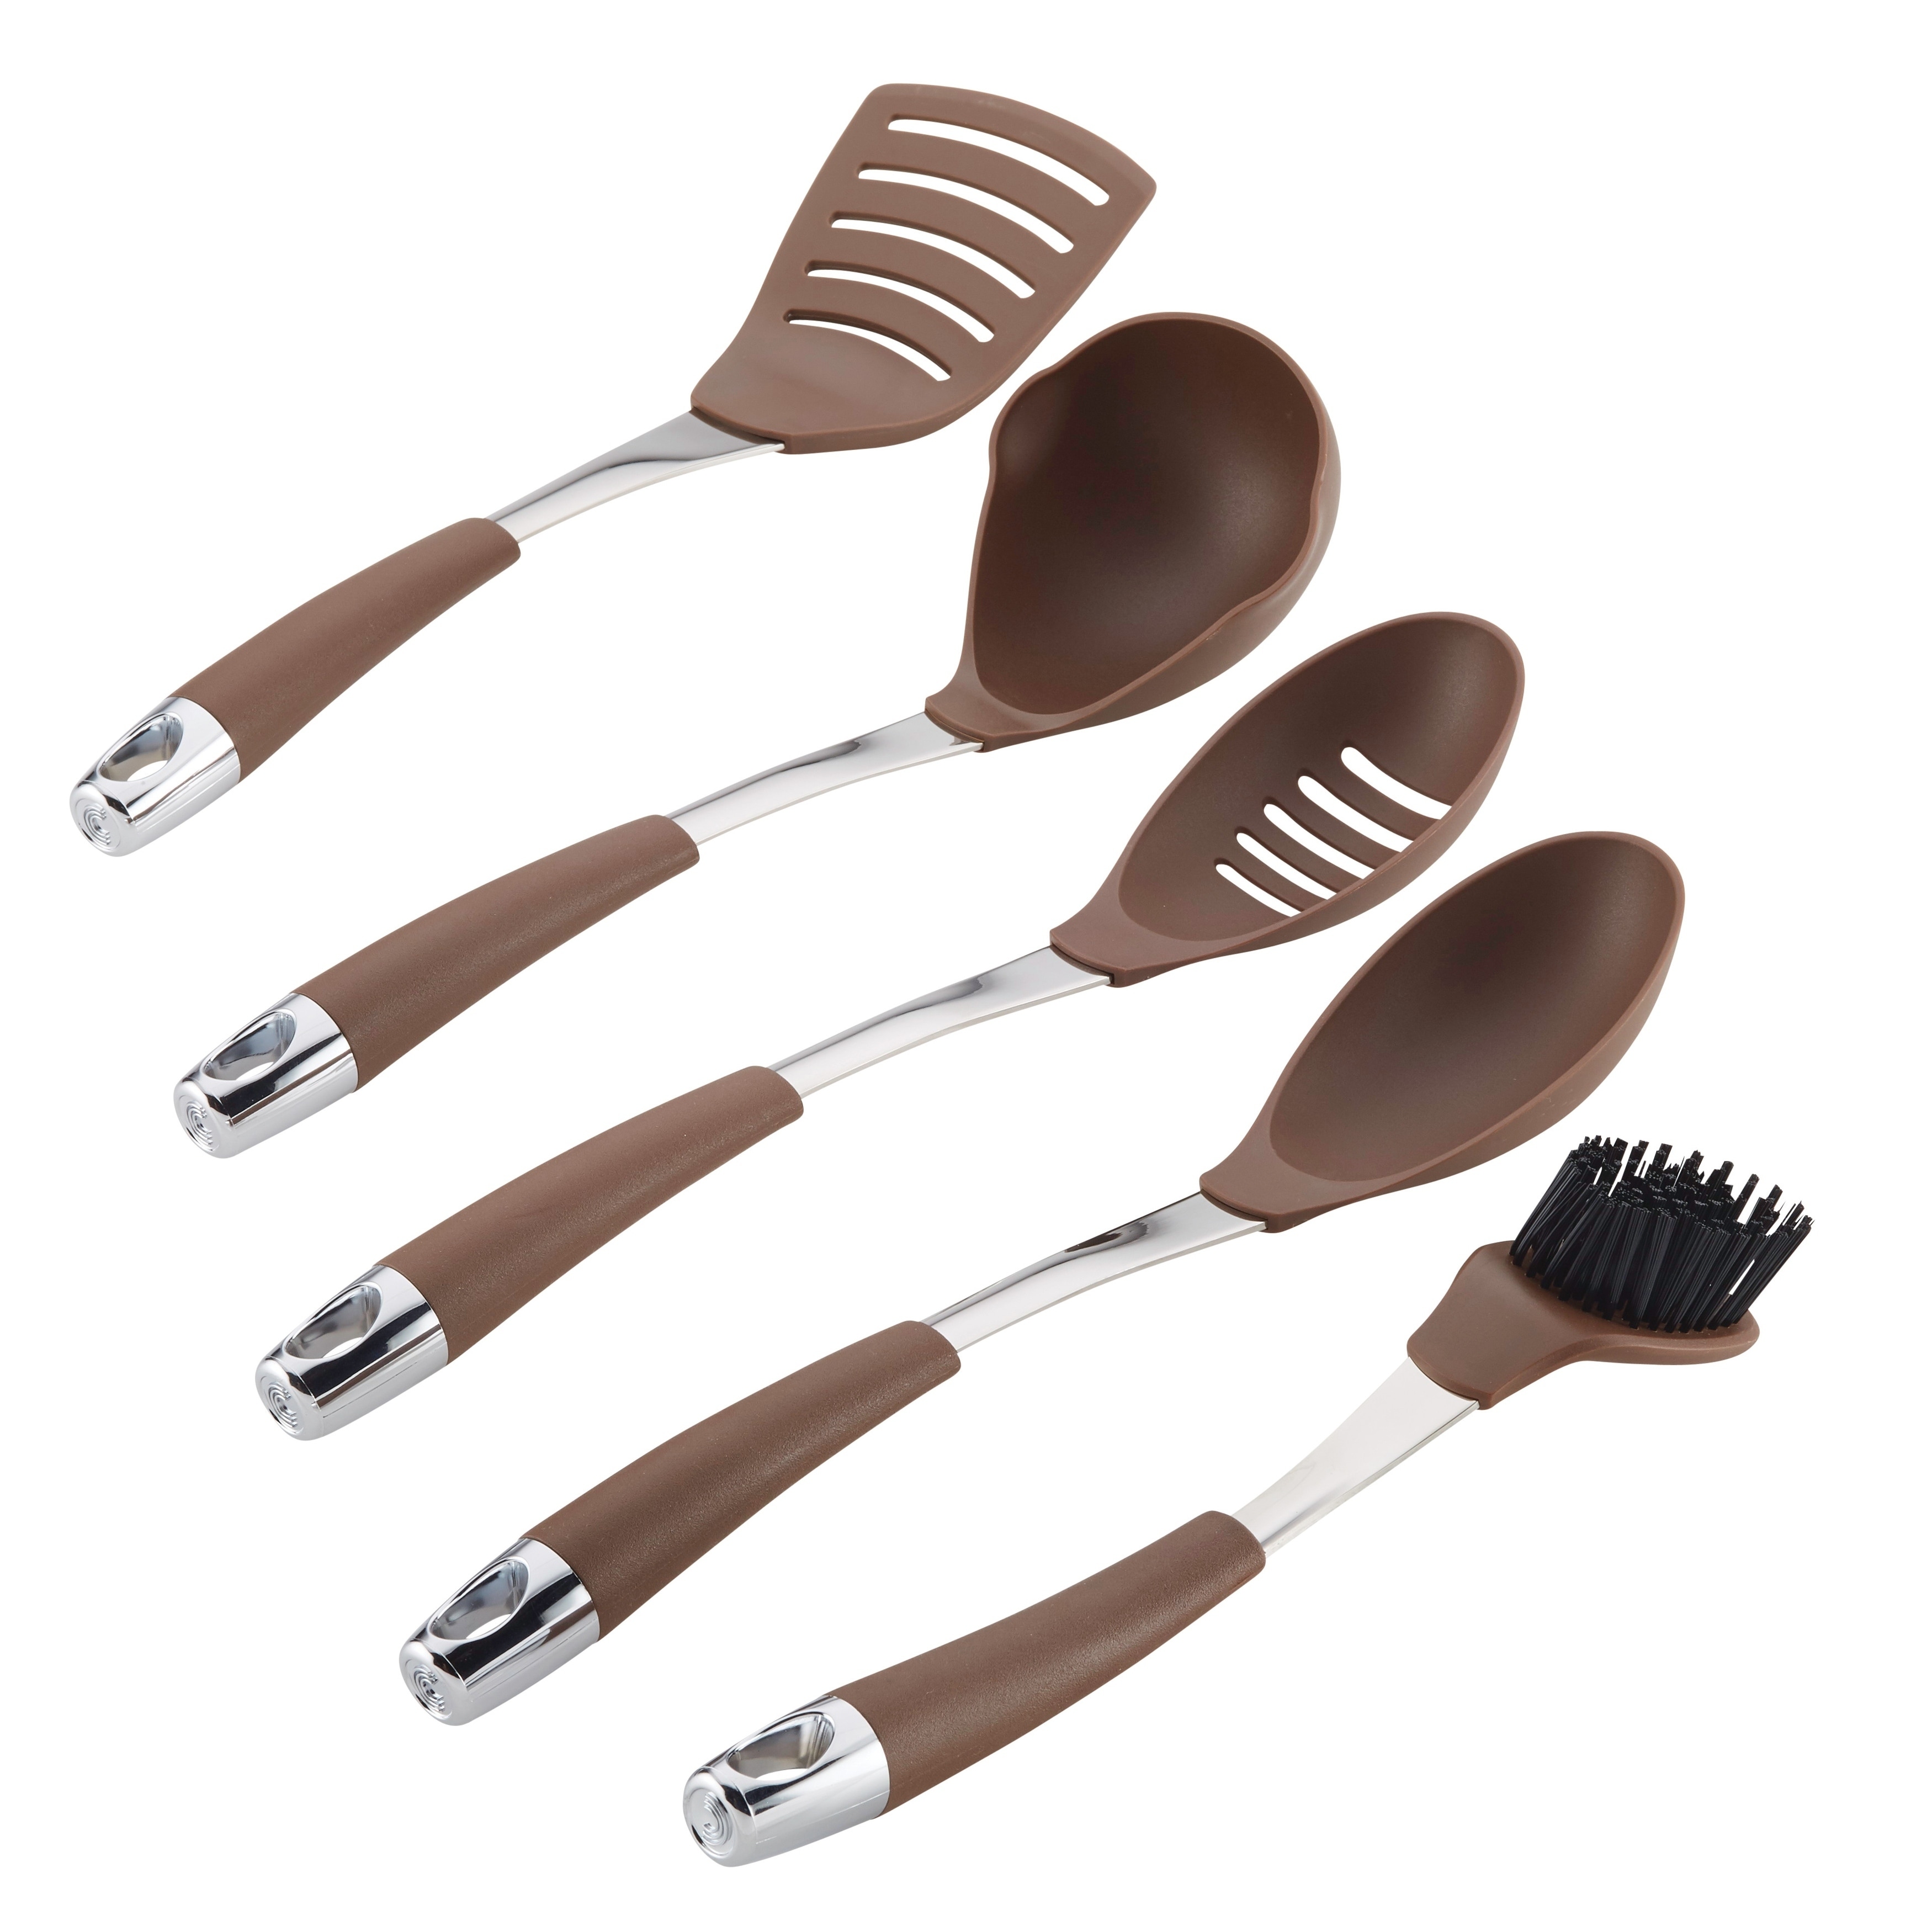 MegaChef Light Teal Silicone Cooking Utensils (Set of 12)